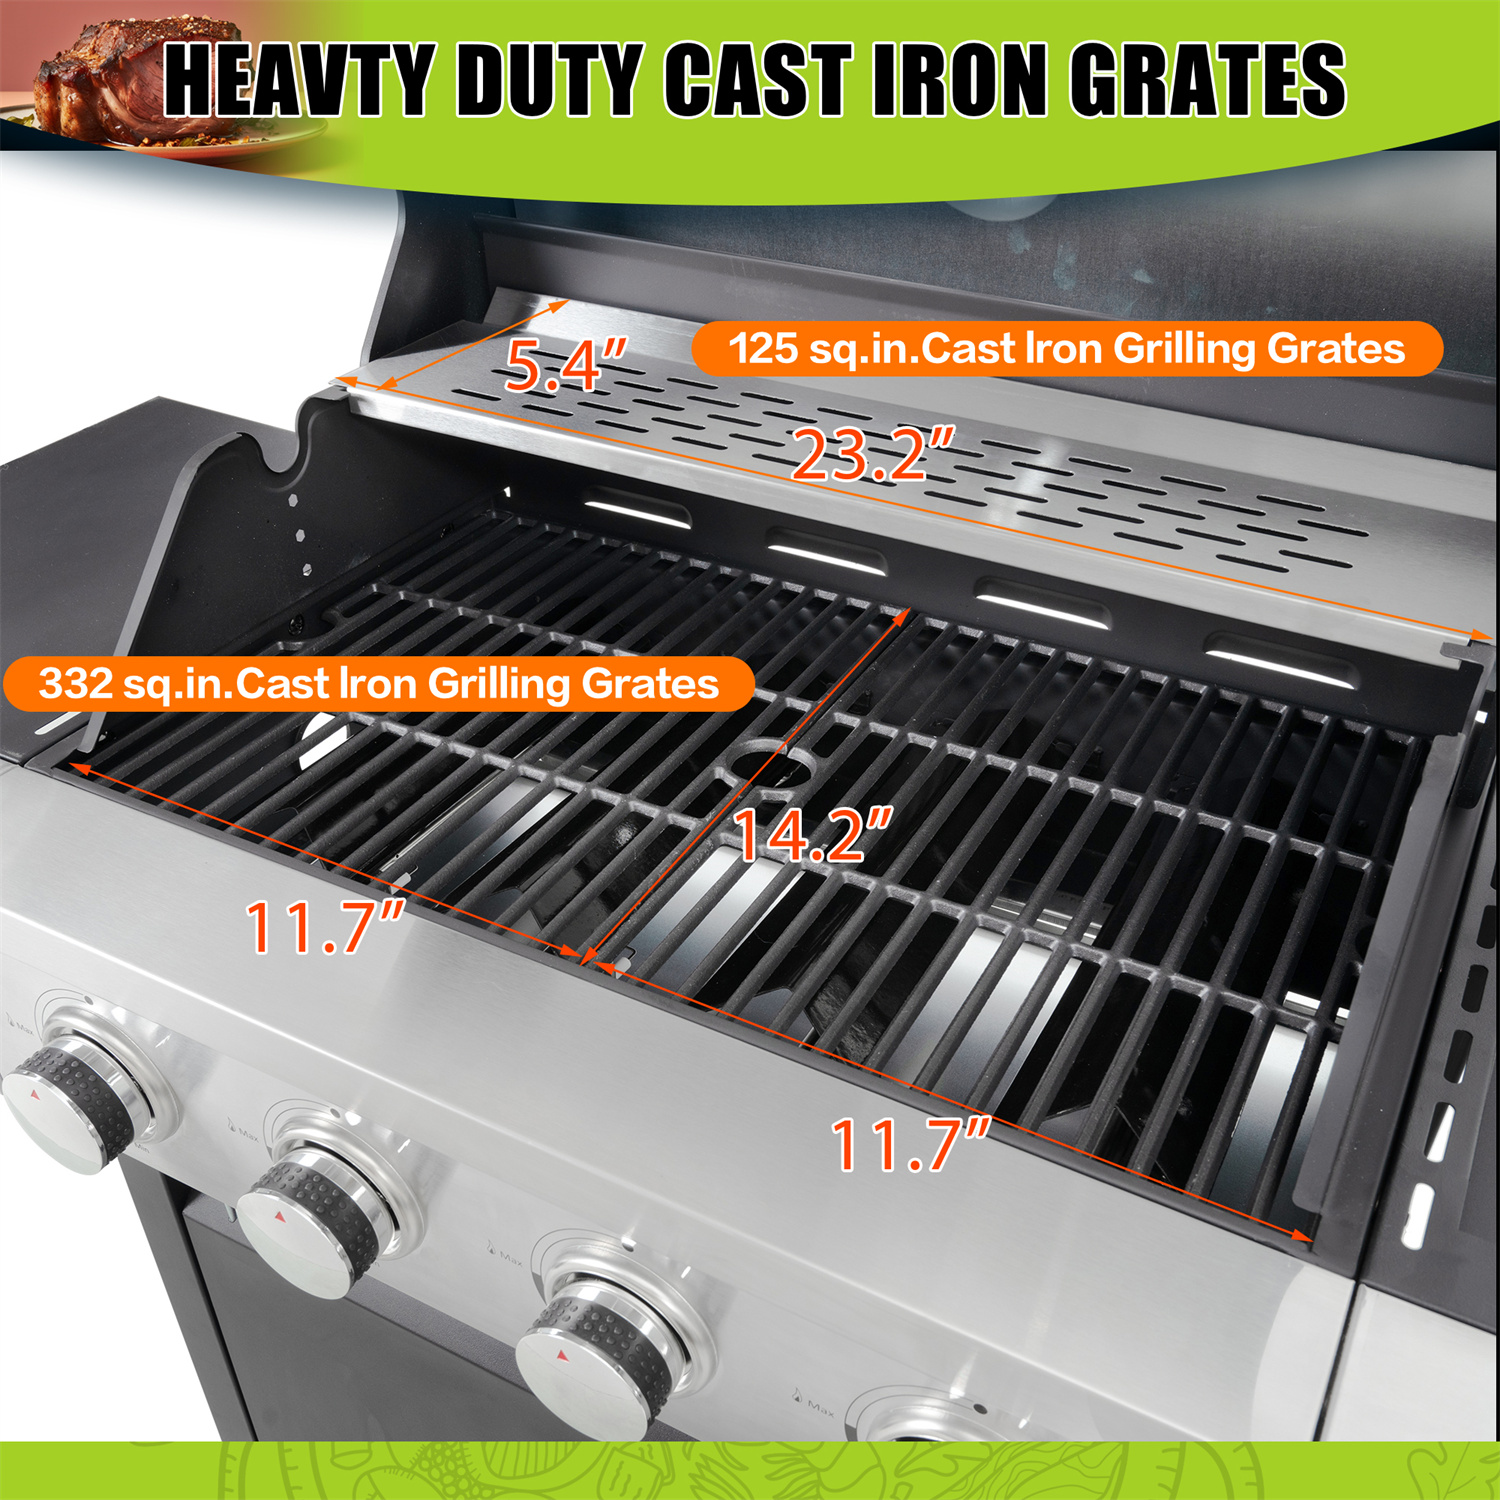 Highsound 4-Burner Propane Gas Grill, Porcelain-Enameled Cast Iron Grates 34,200 BTU Outdoor Cooking Stainless Steel BBQ Grills Cabinet - image 5 of 9